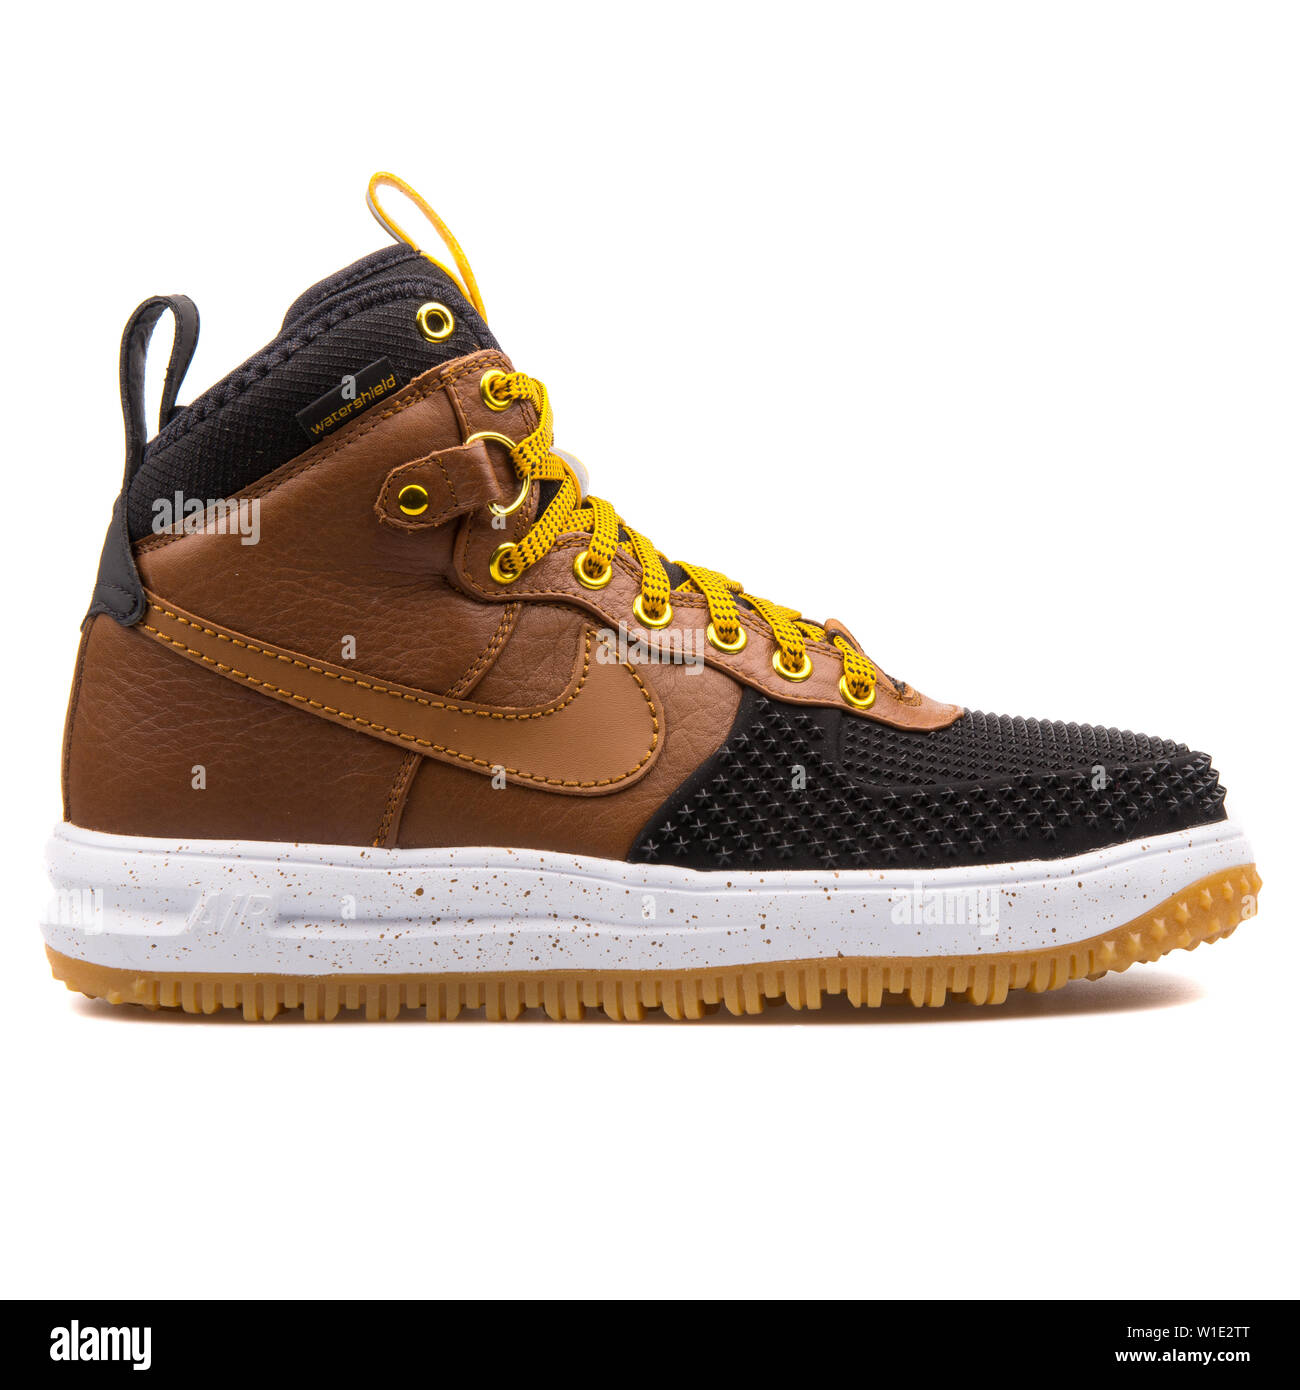 VIENNA, AUSTRIA - AUGUST 25, 2017: Nike Lunar Force 1 Duckboot black and  brown sneaker on white background Stock Photo - Alamy